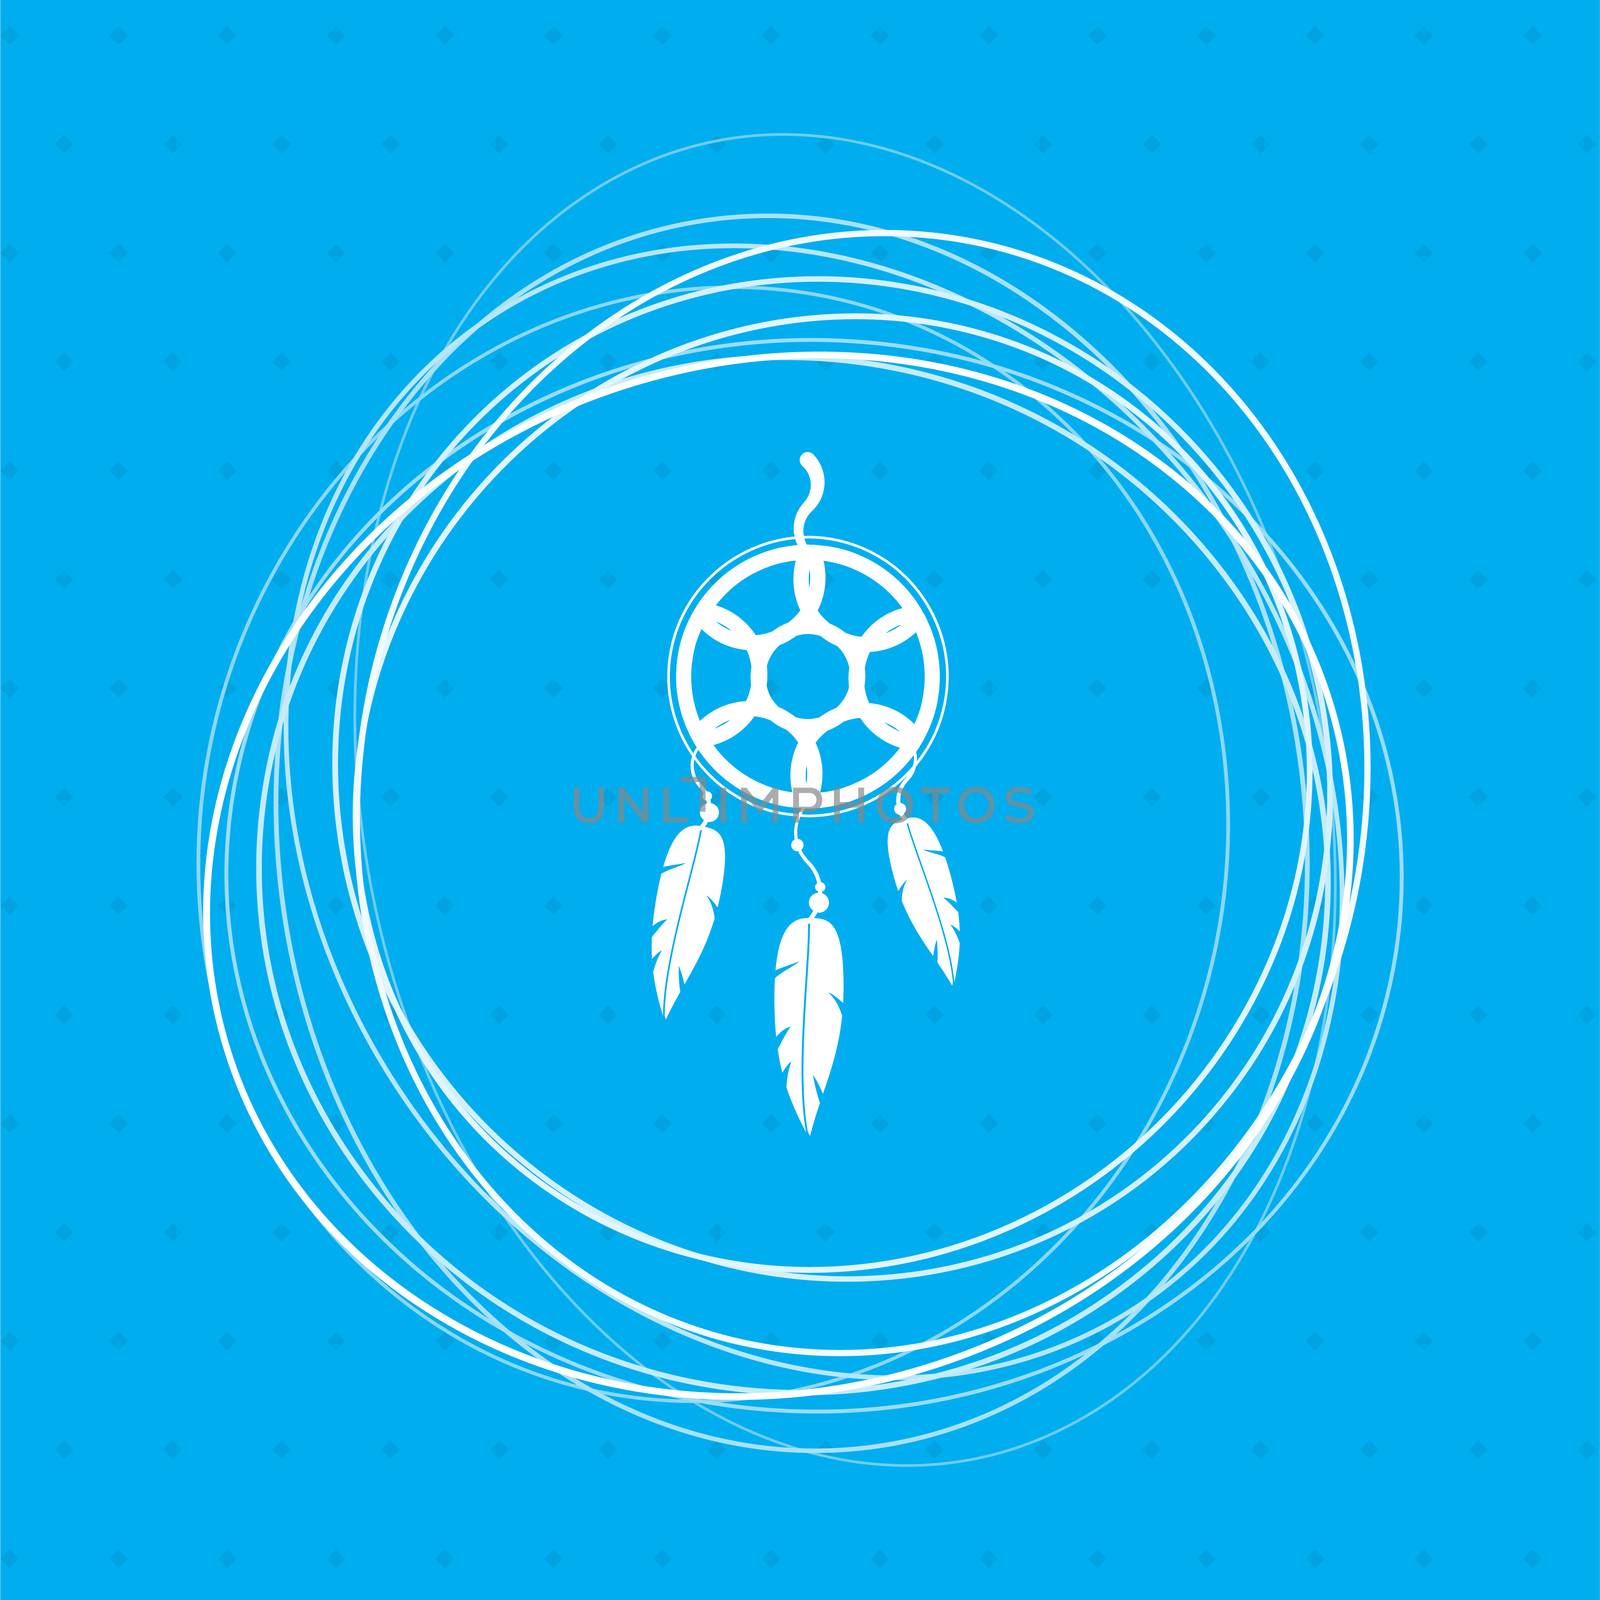 Dreamcatcher icon on a blue background with abstract circles around and place for your text.  by Adamchuk